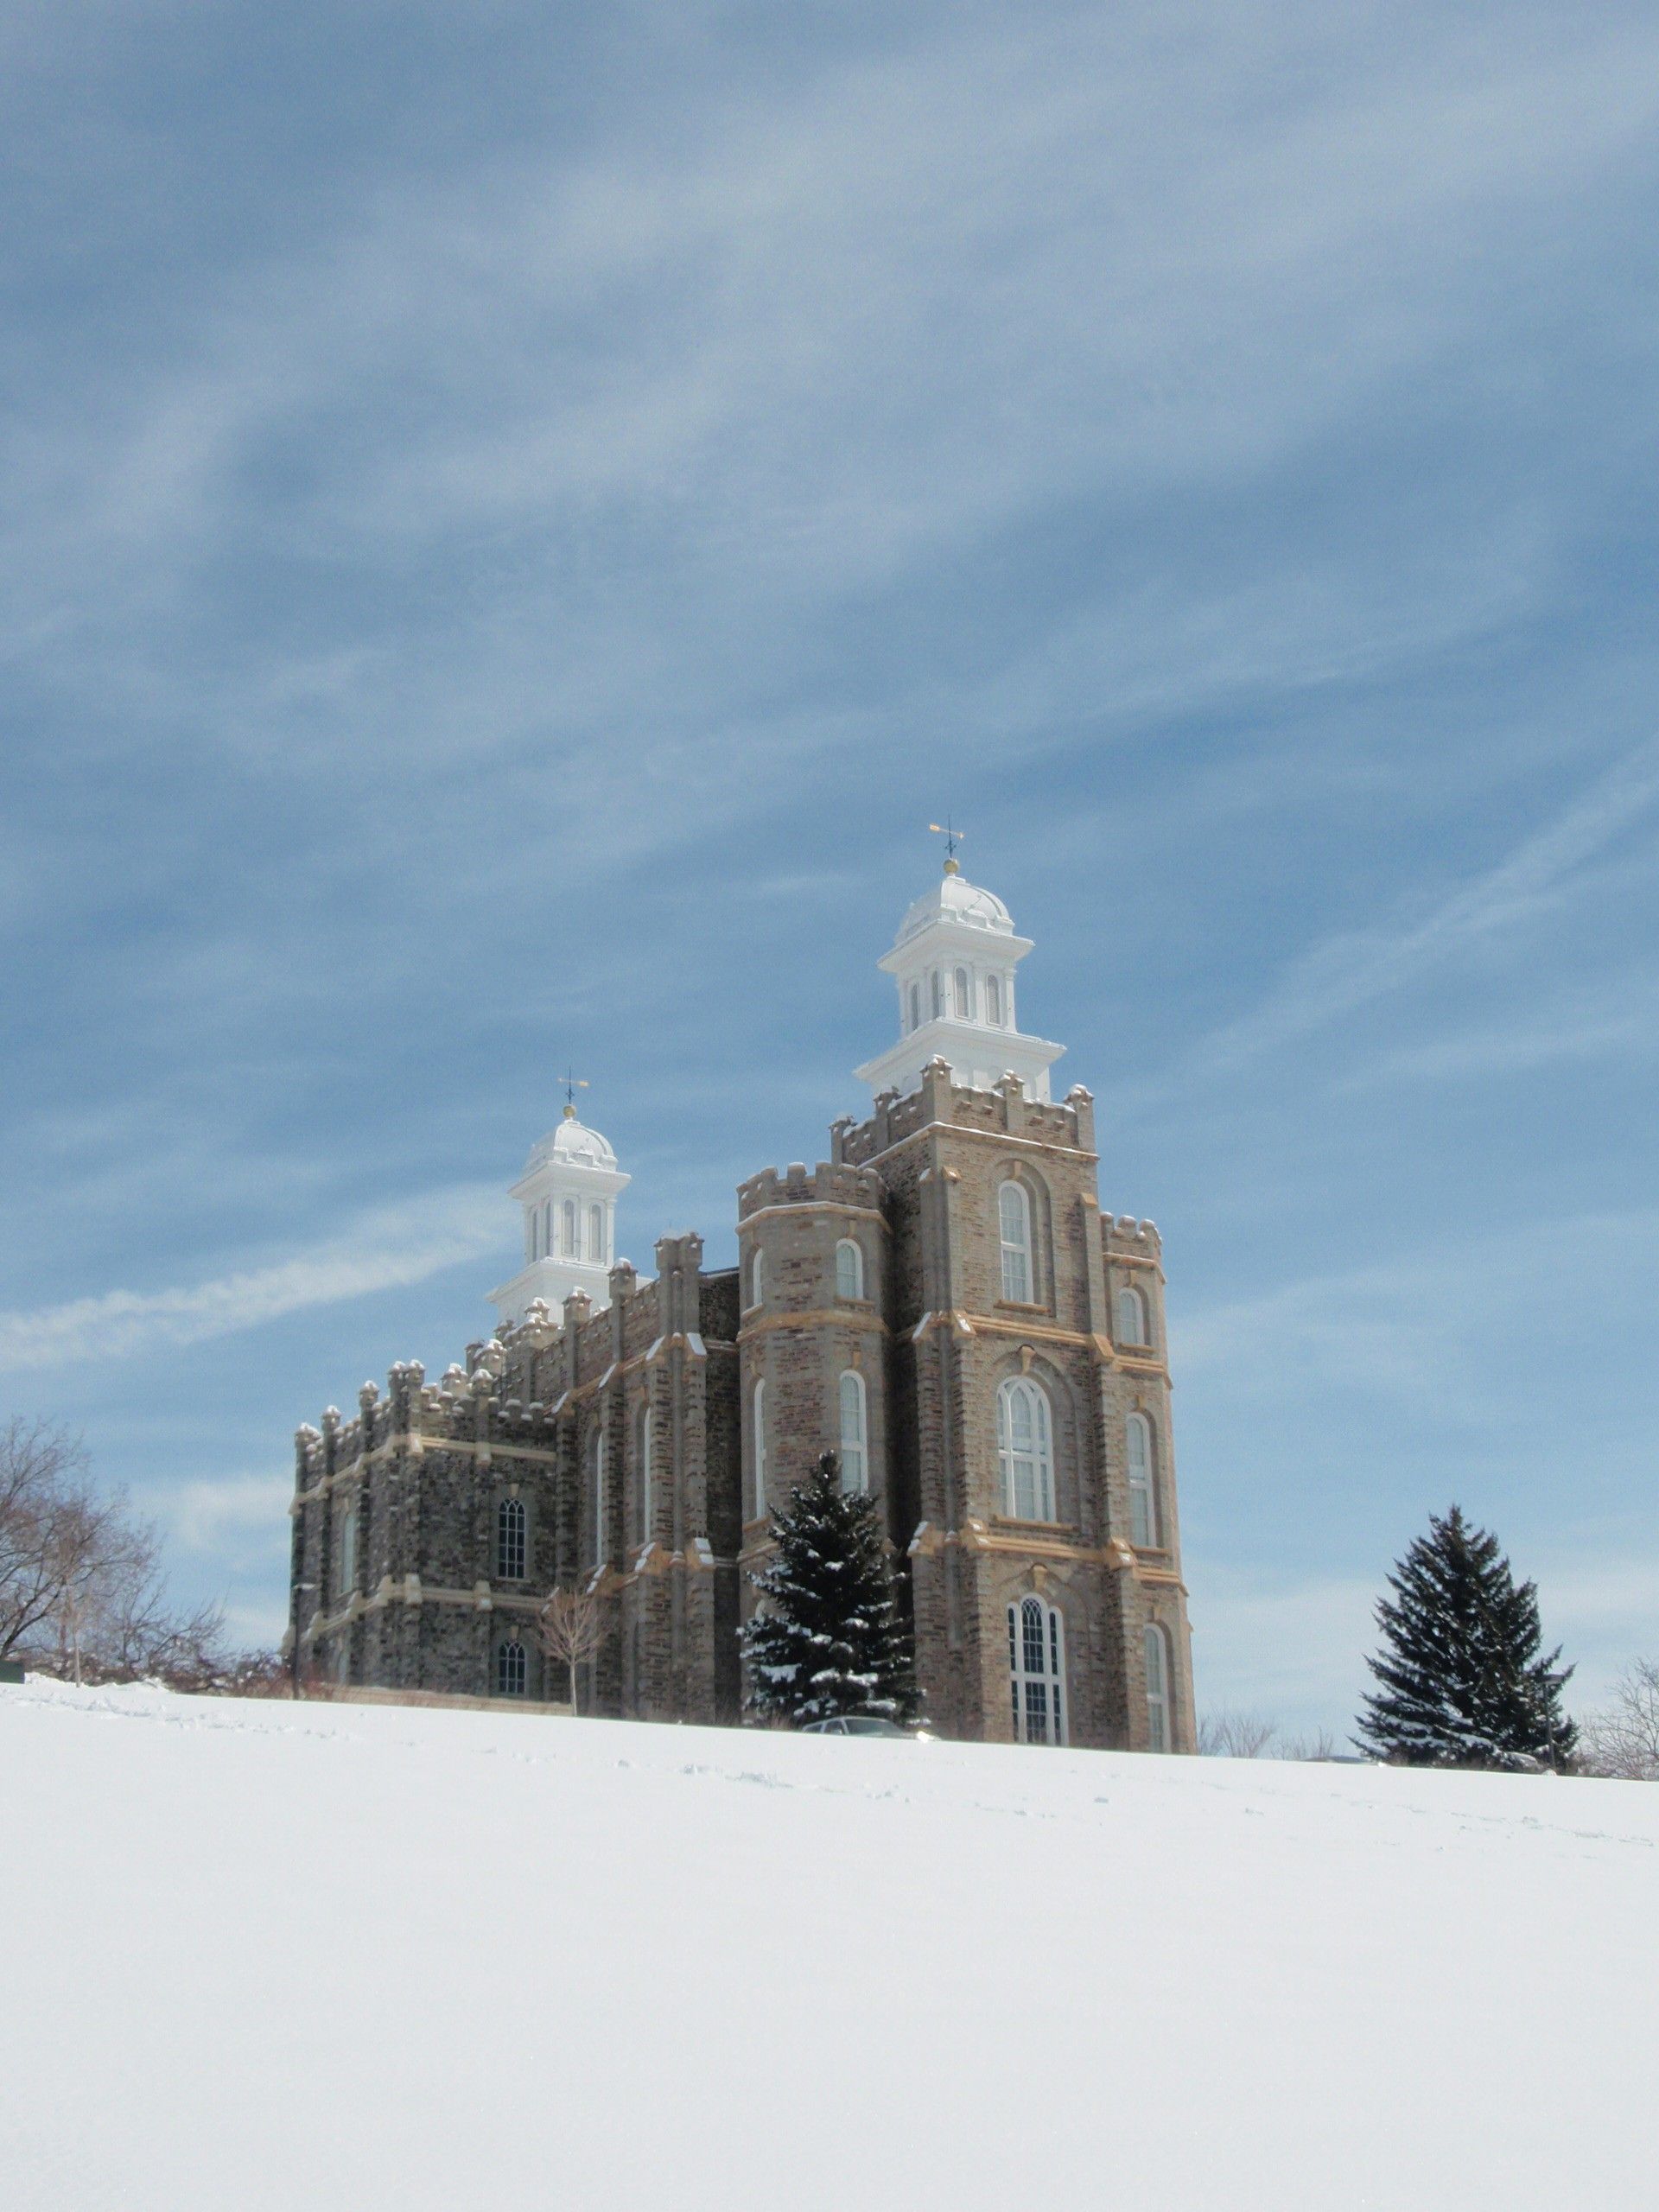 The Logan Utah Temple in the winter, including scenery.